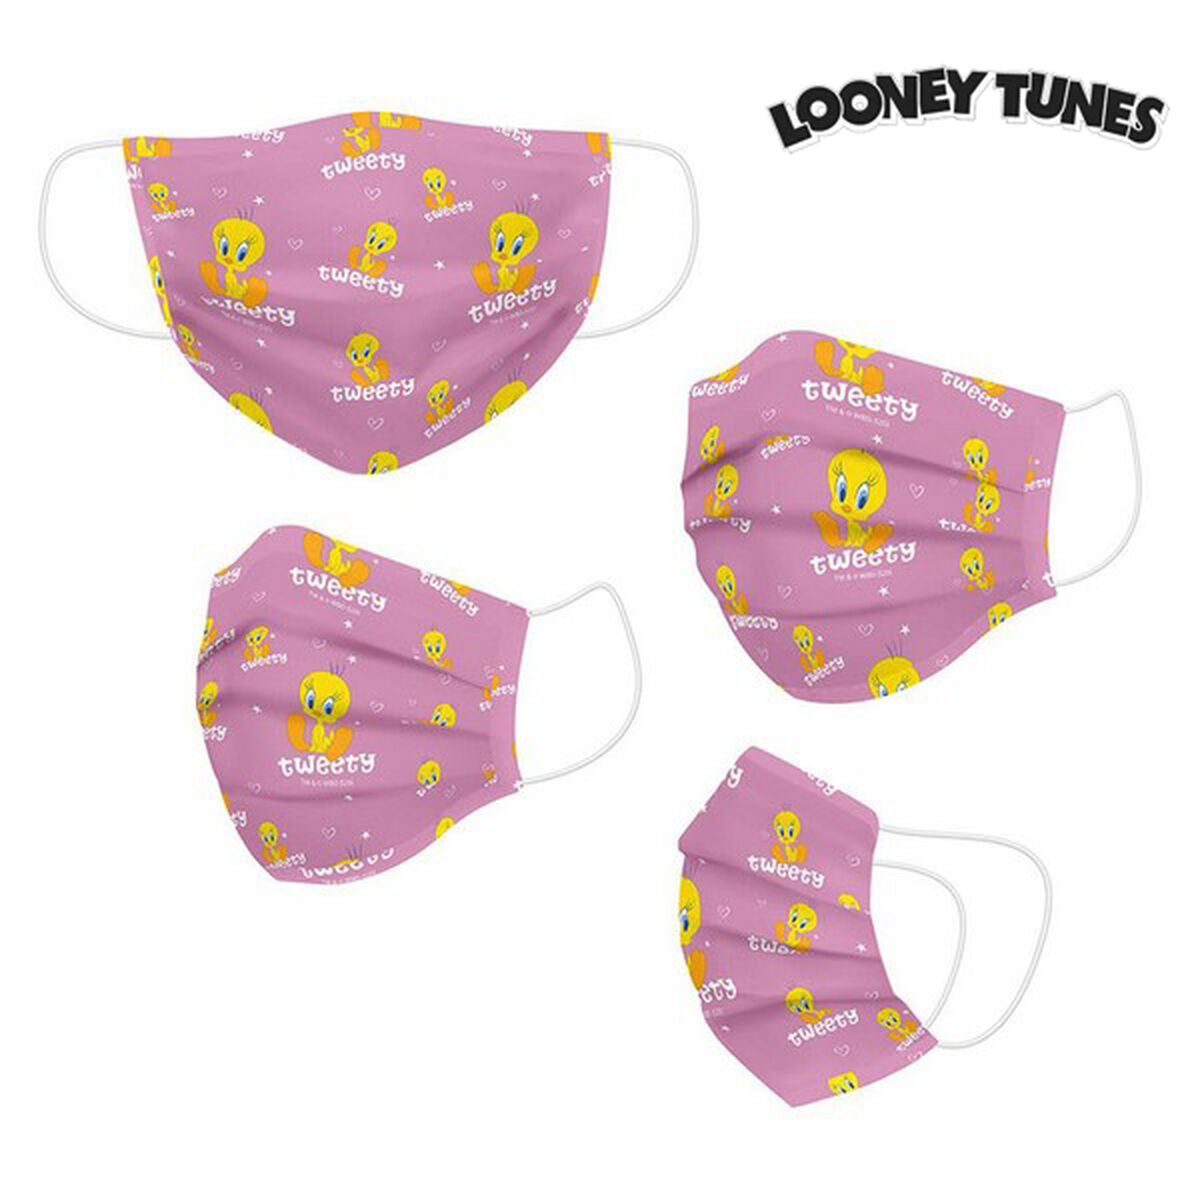 Hygienic Reusable Fabric Mask Looney Tunes Children's Pink - Calm Beauty IE